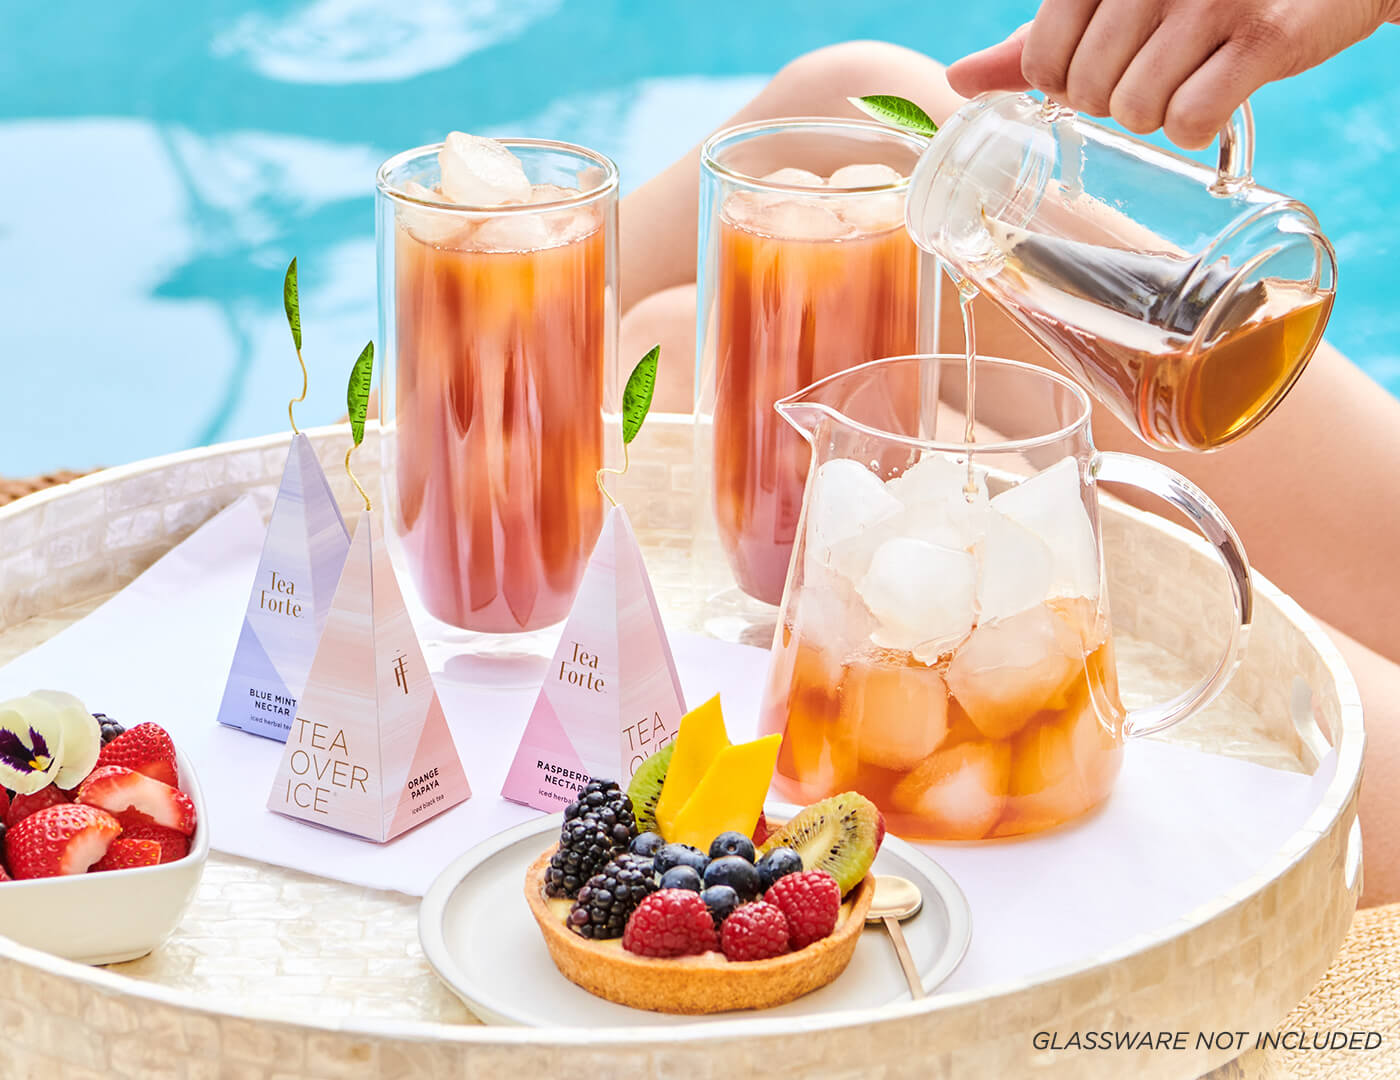 Tea Over Ice, serving by the pool in glasses with fruit tarts.